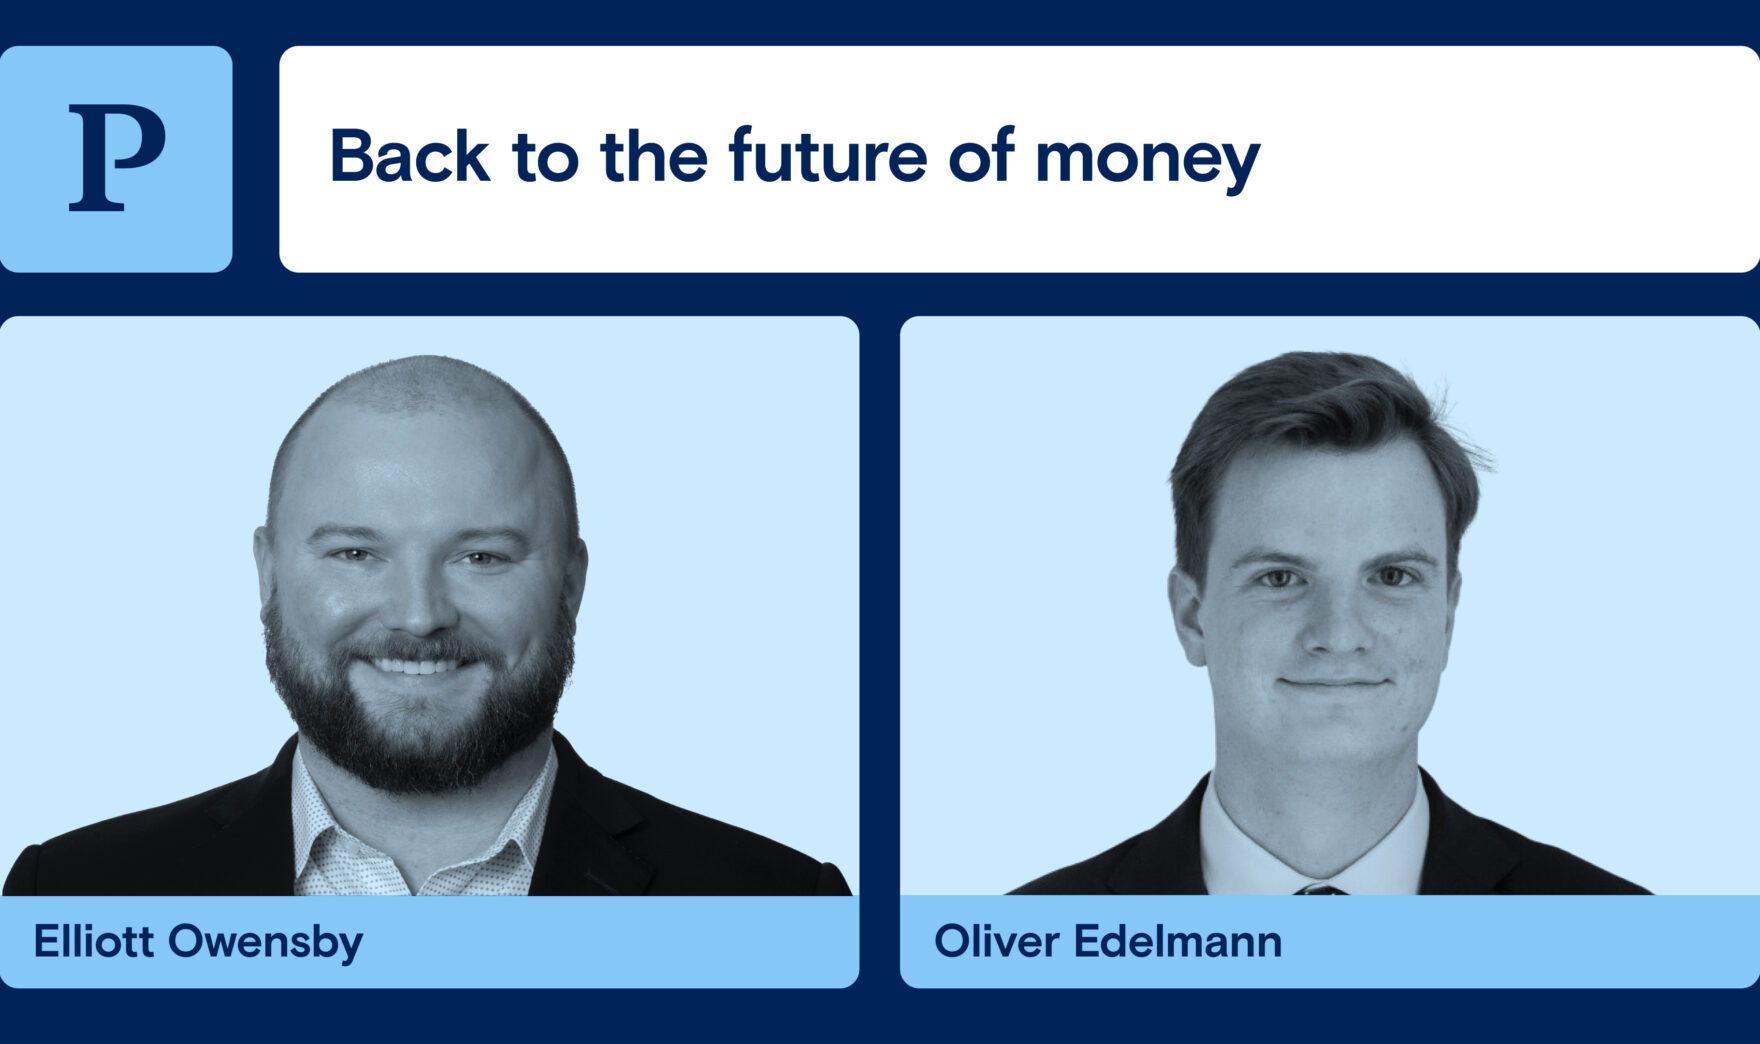 Back to the future of money